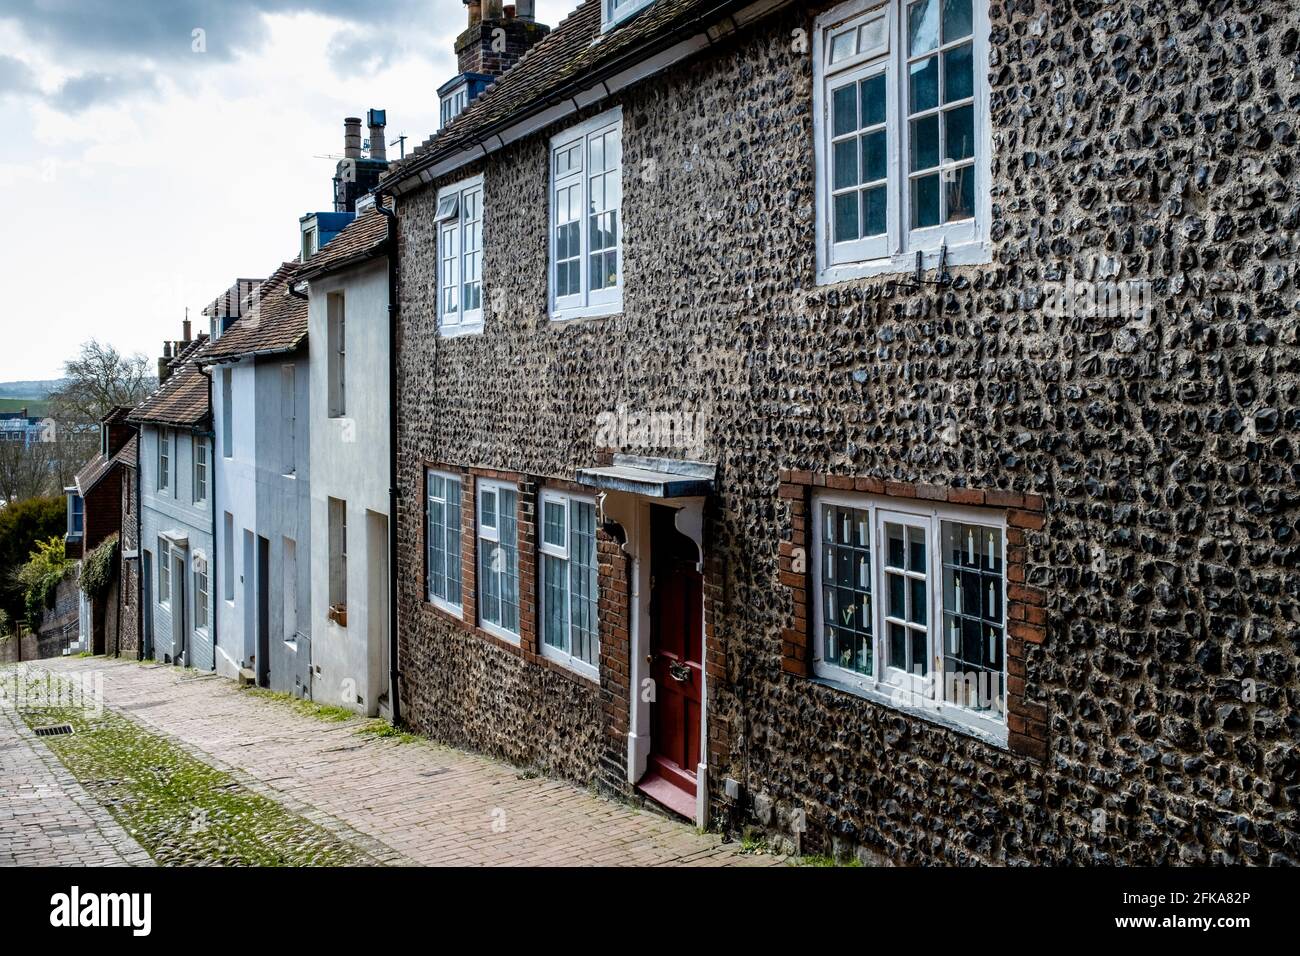 Keere Street, Lewes, East Sussex, Regno Unito. Foto Stock